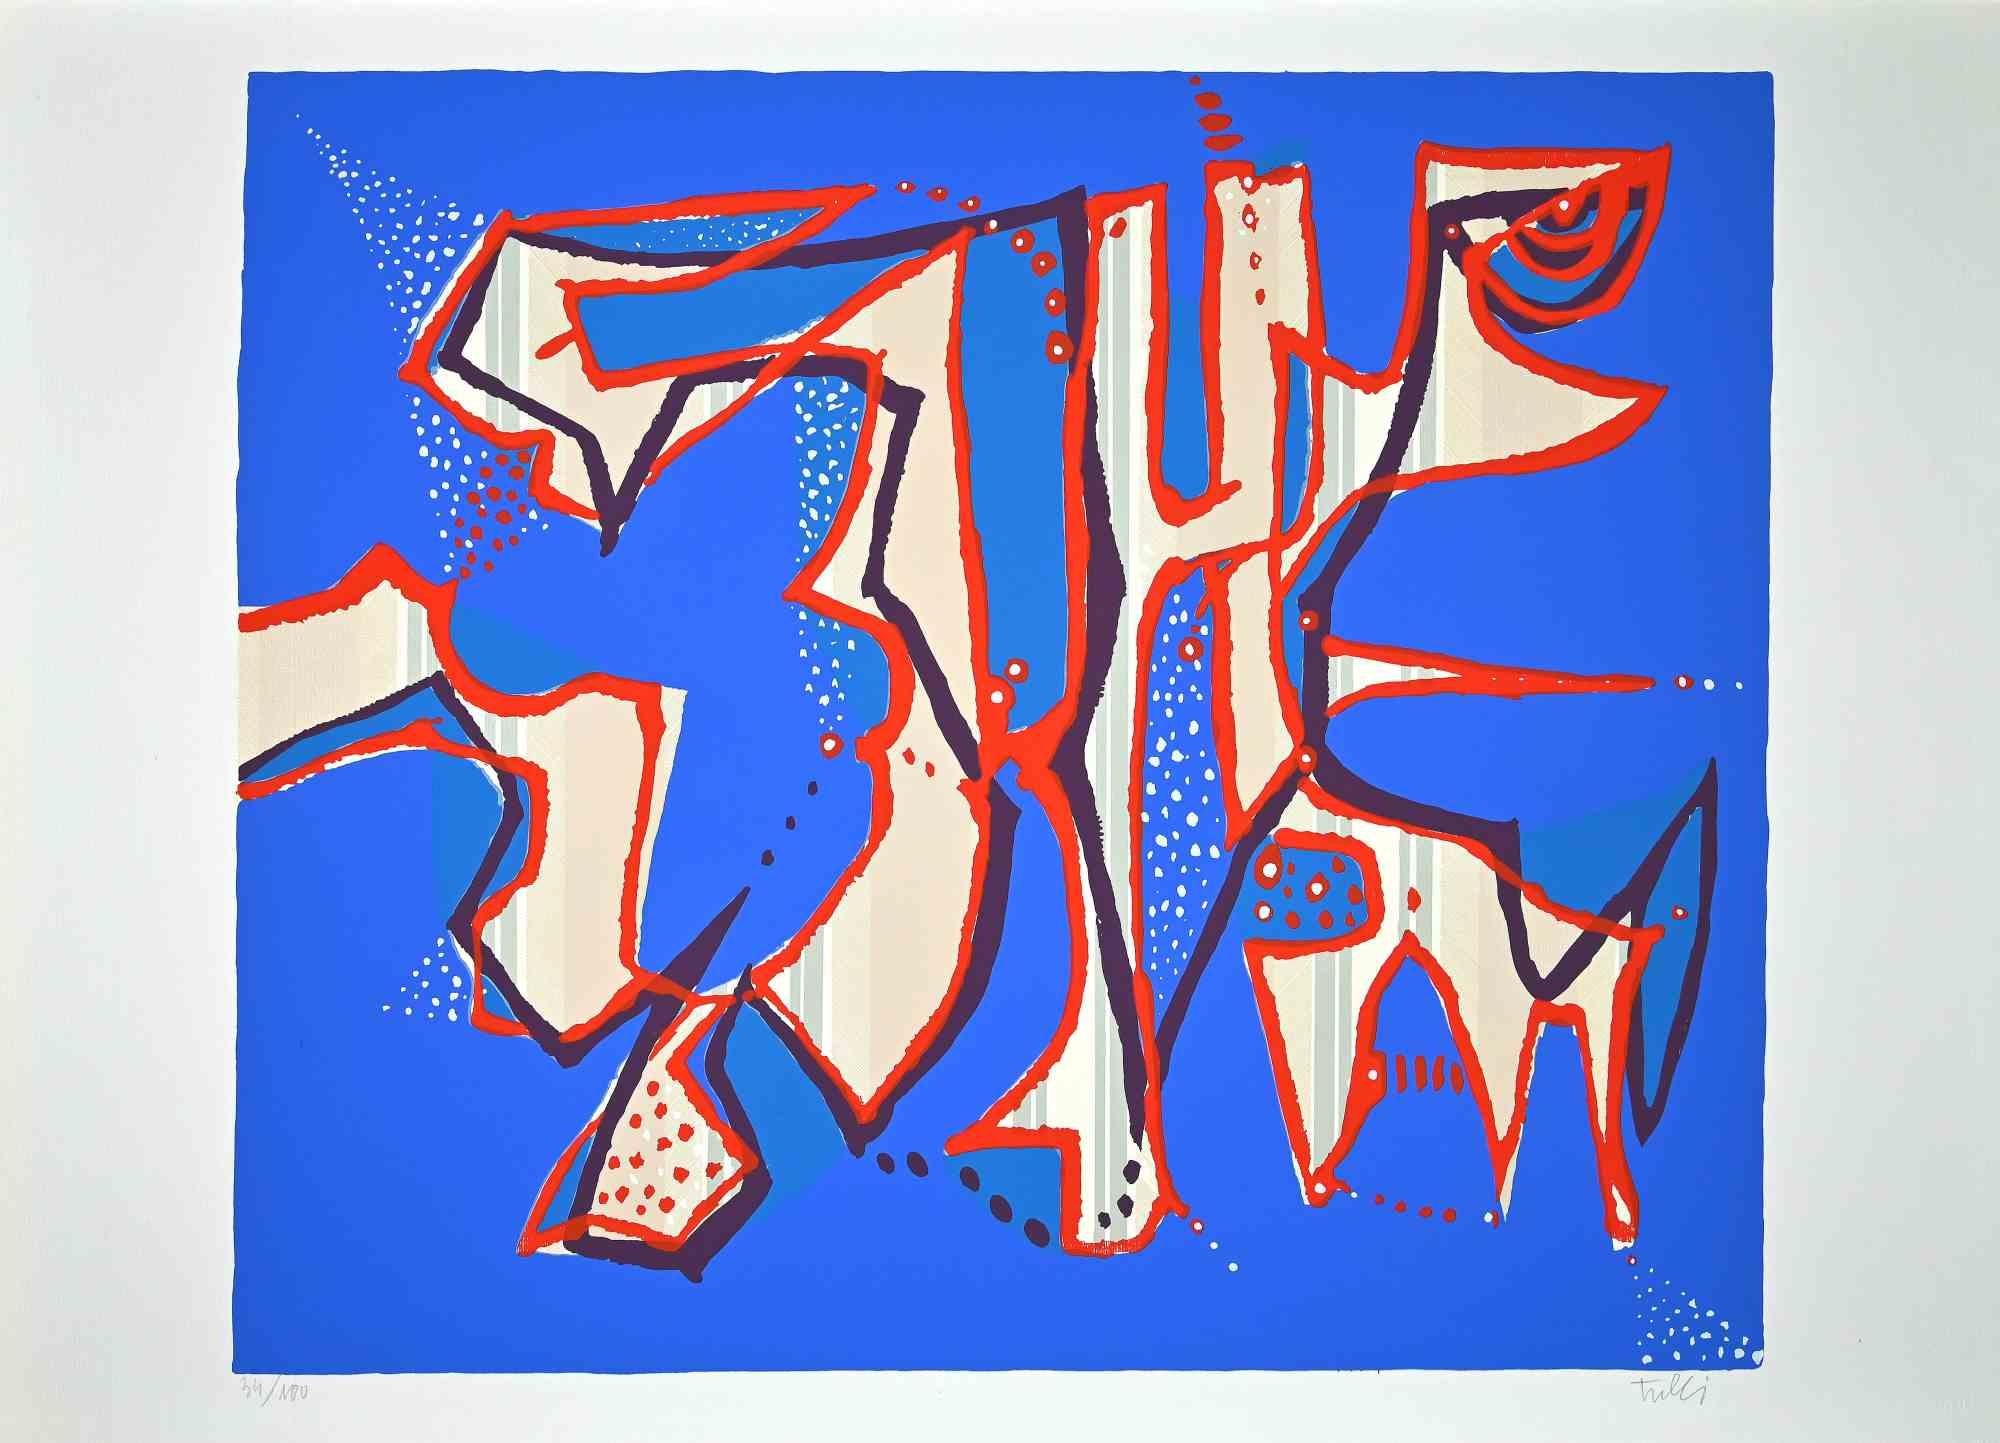 Composition in Blue - Original Colored Screen Print by Wladimiro Tulli - 1970s